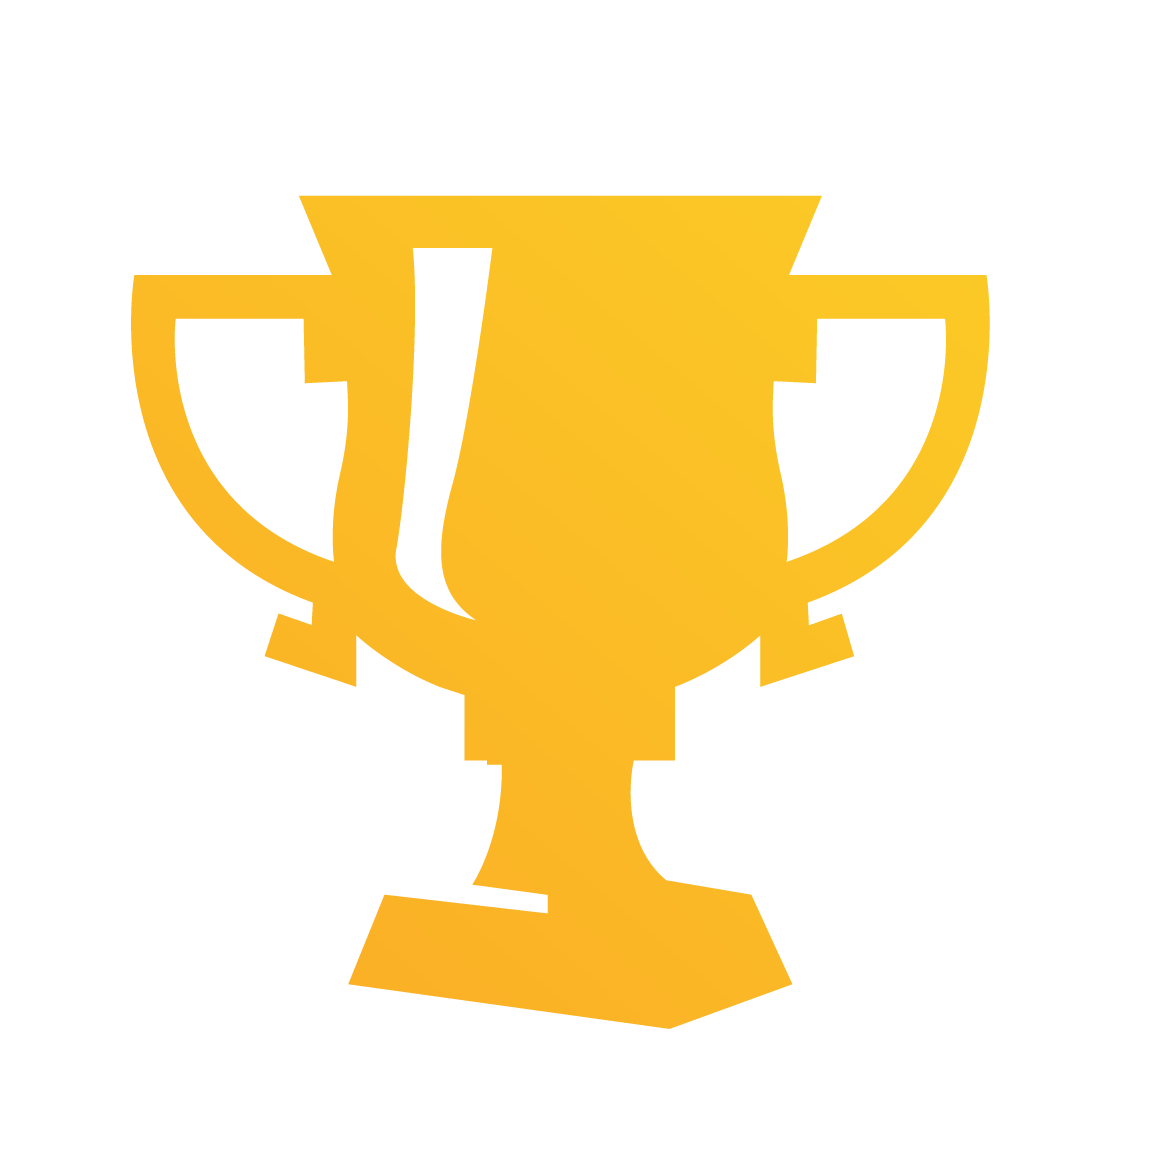 clipart volleyball trophy